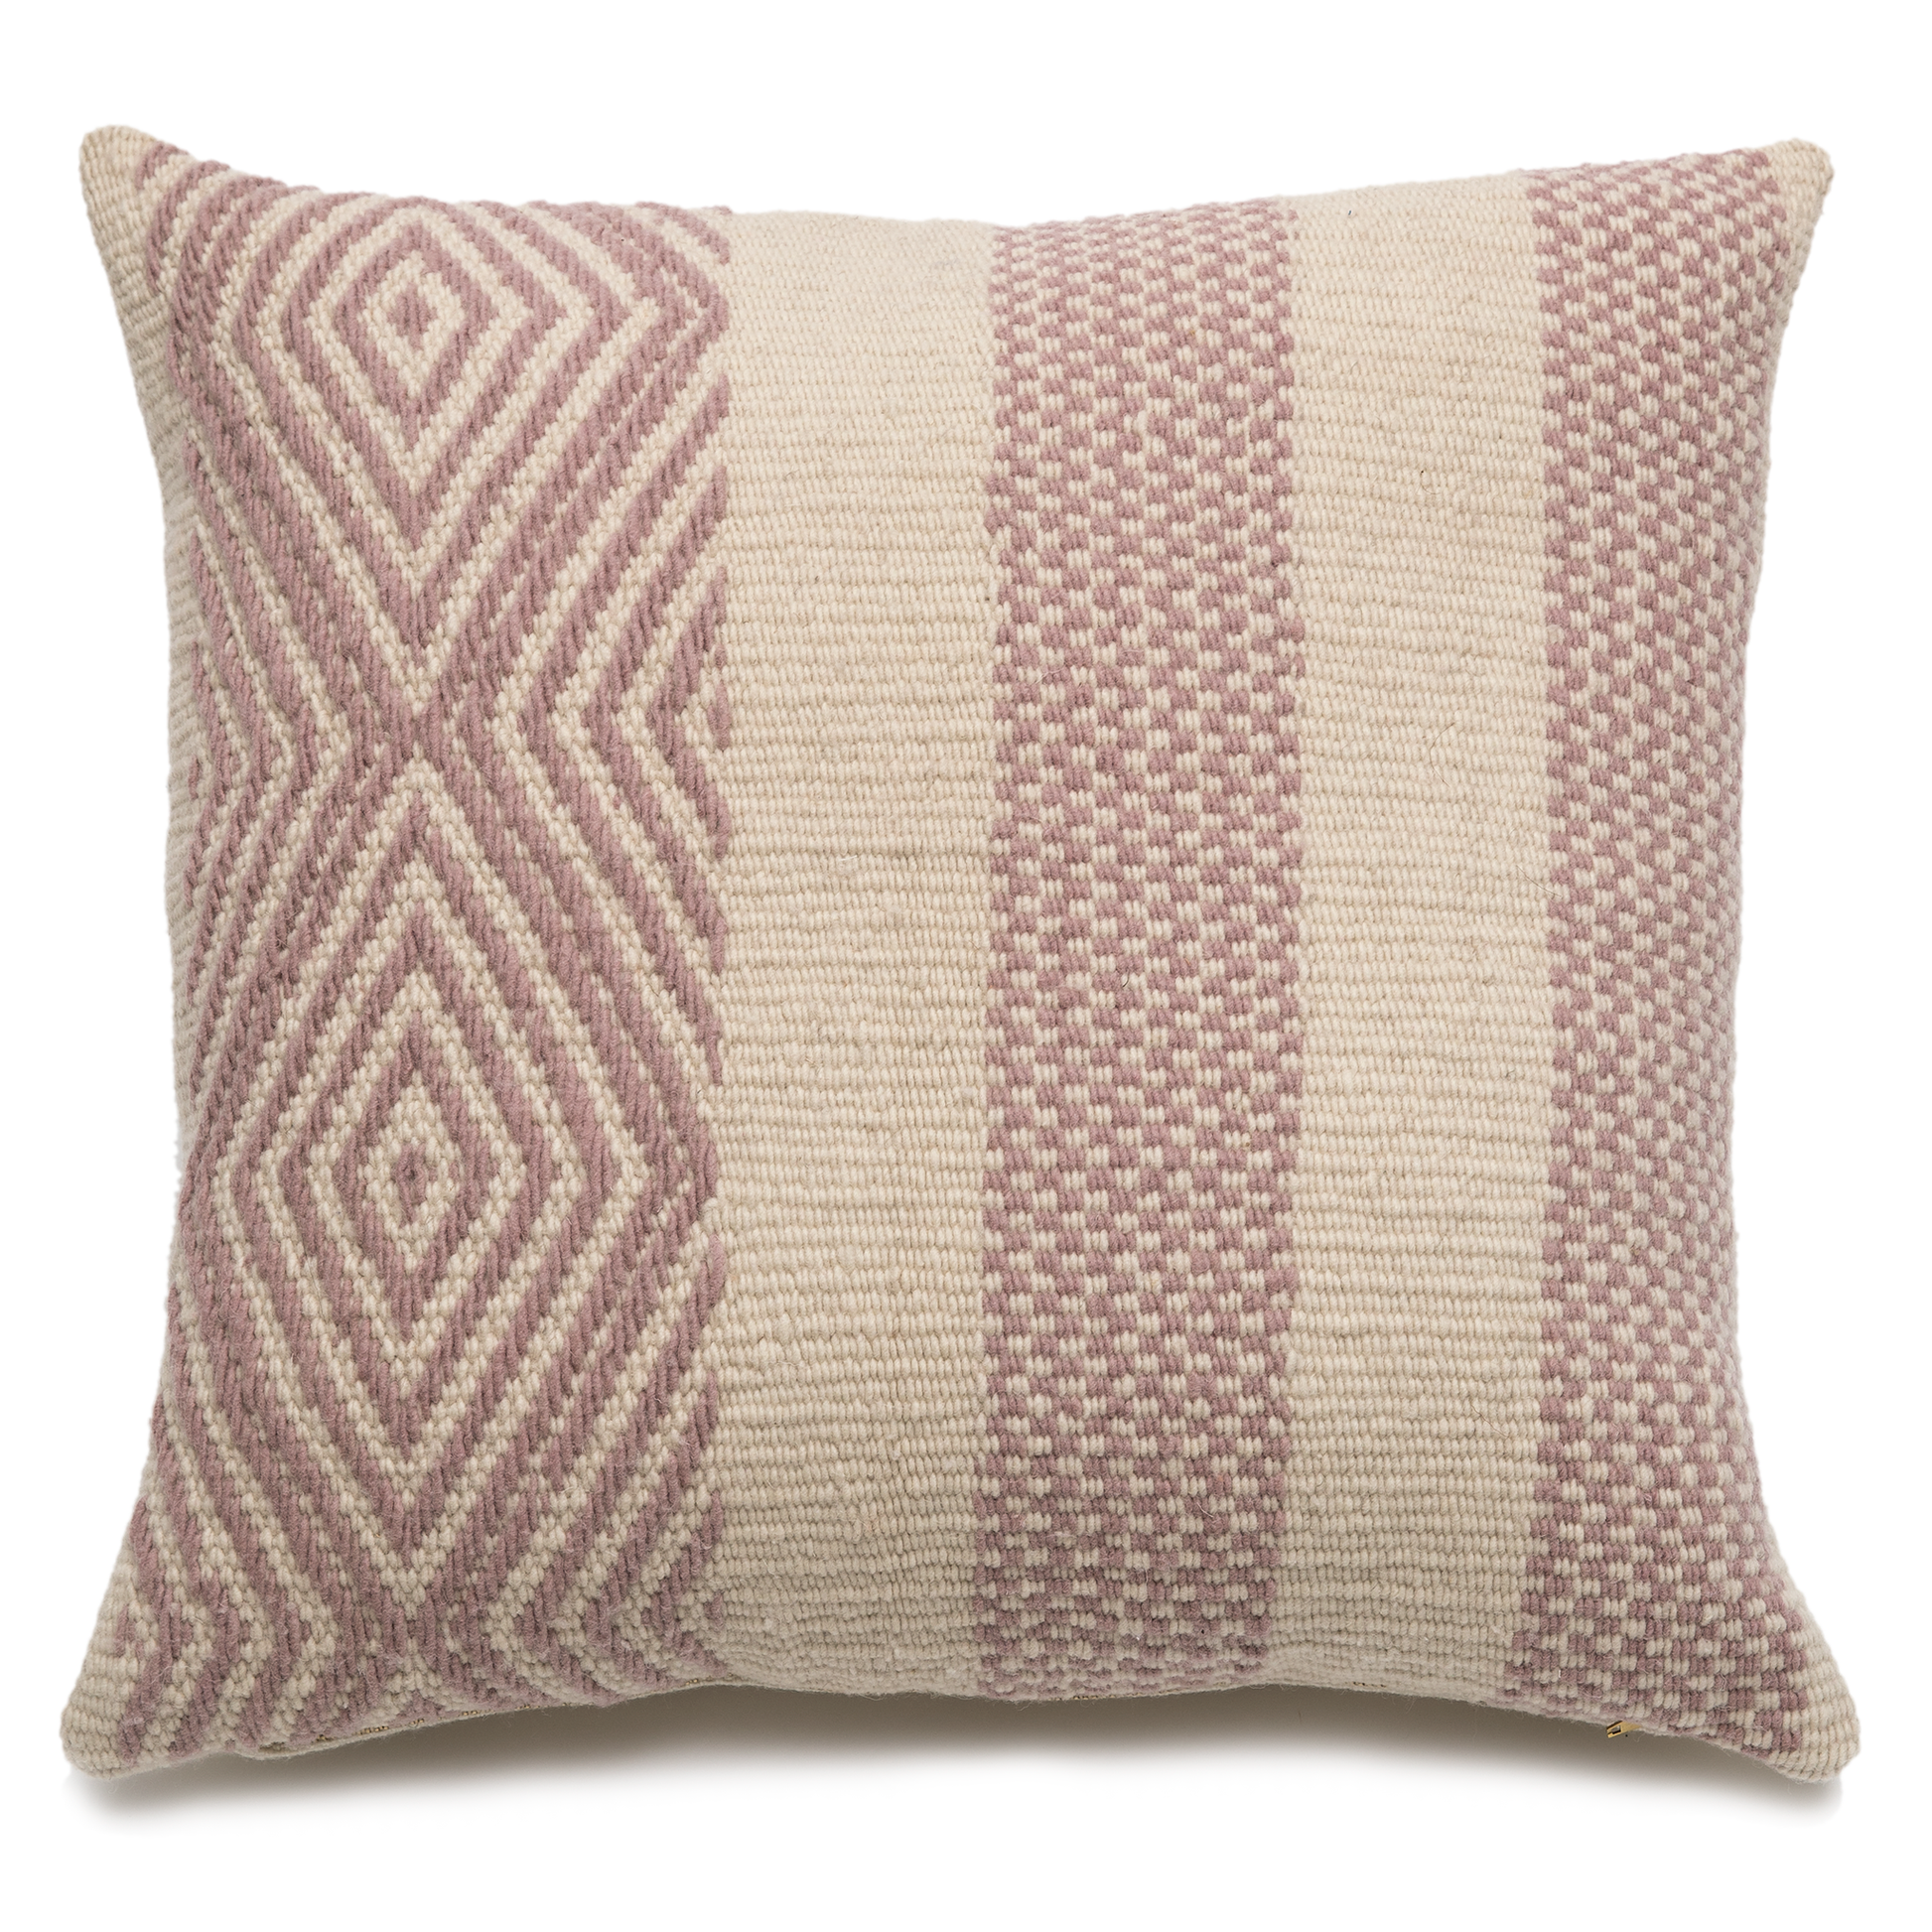 Intiearth hand woven lavendar botanically dyed decorative wool pillow Sacred Valley collection 20" square